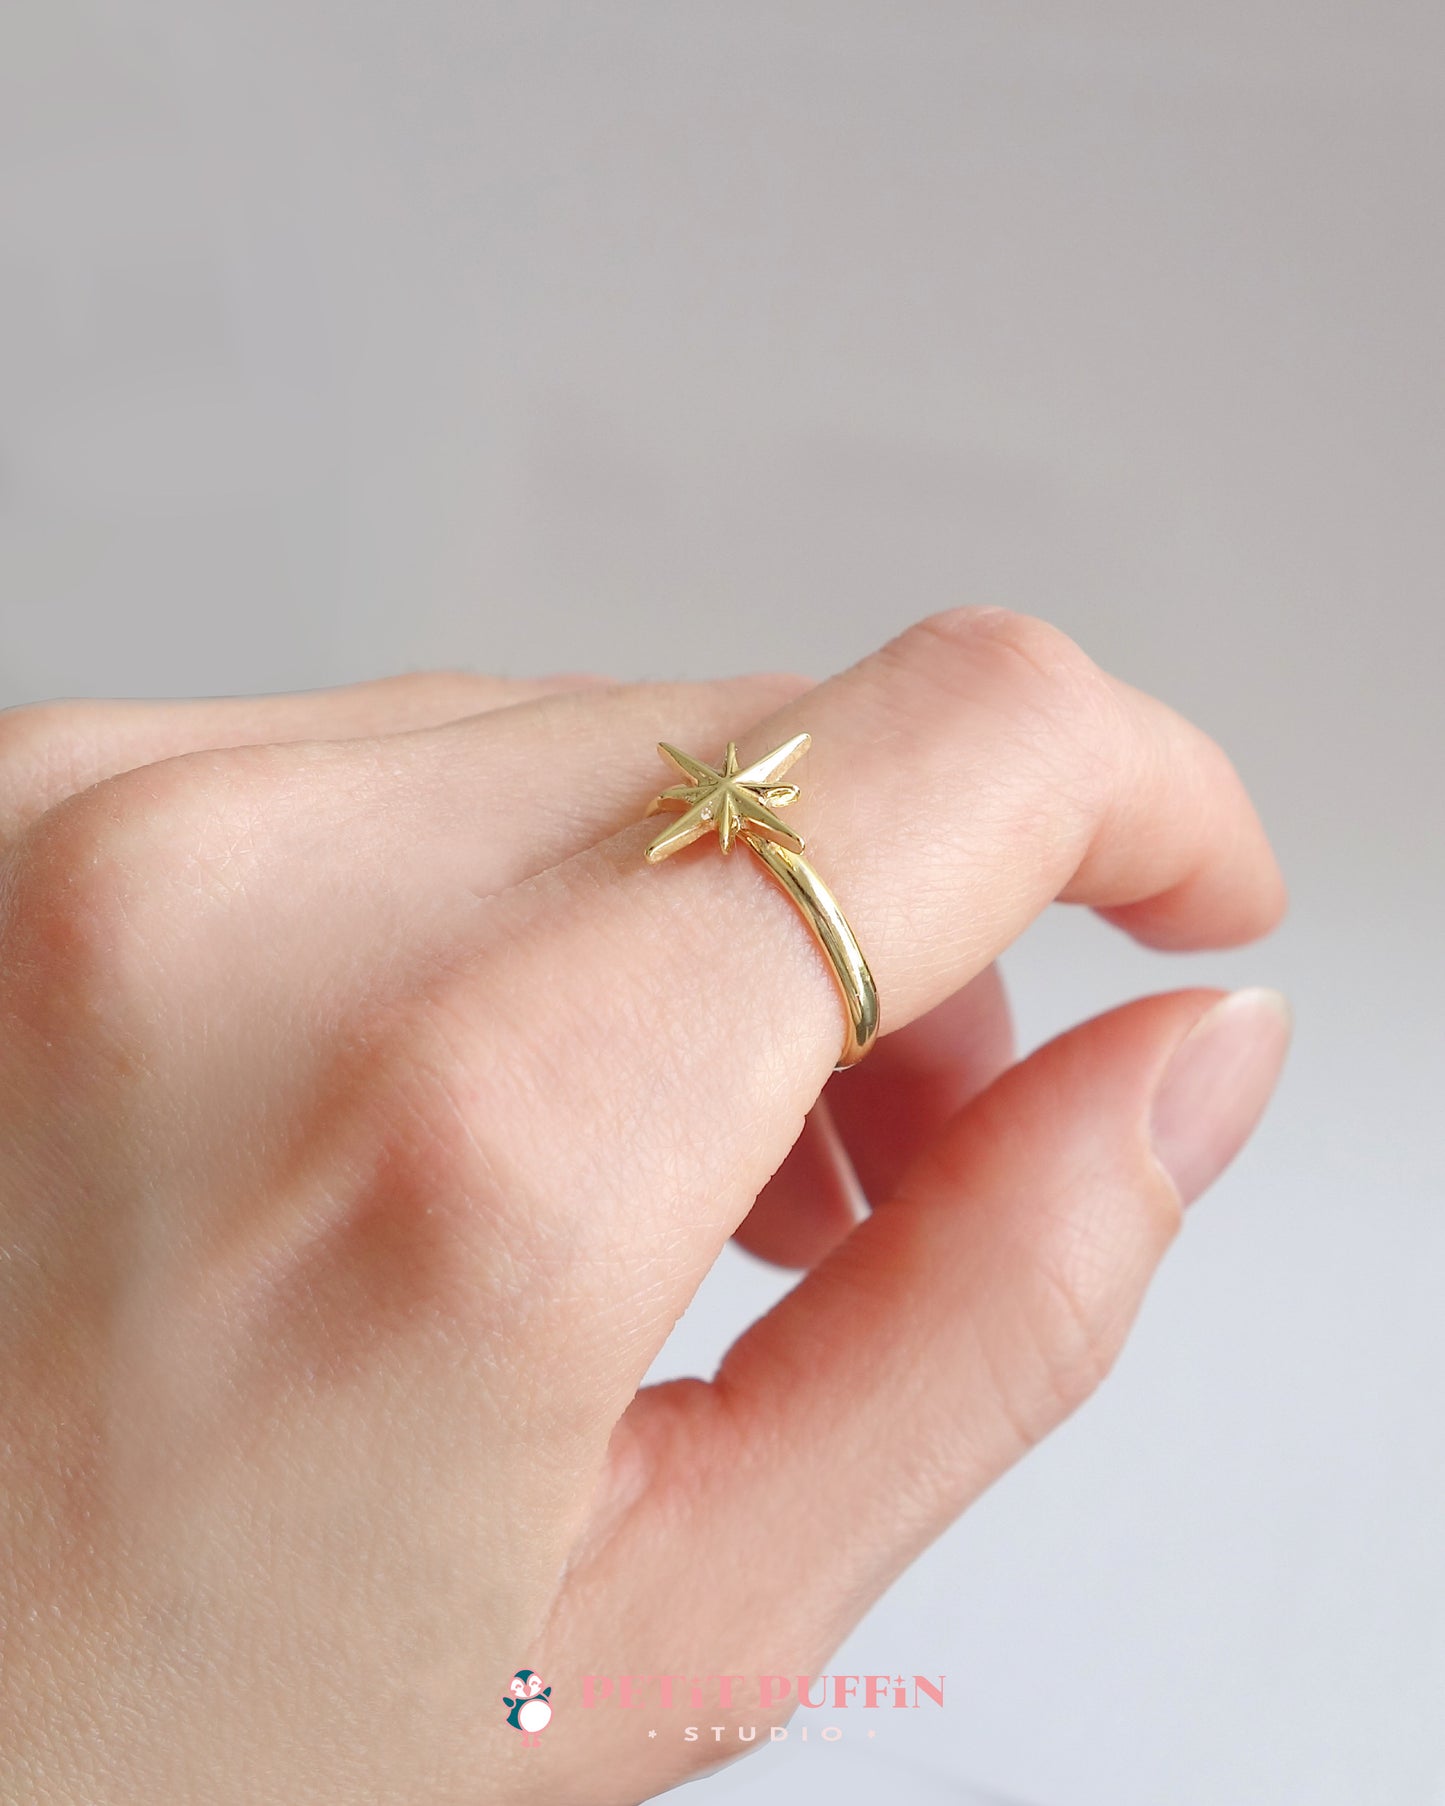 The Long Journey - "compass rose" adjustable ring